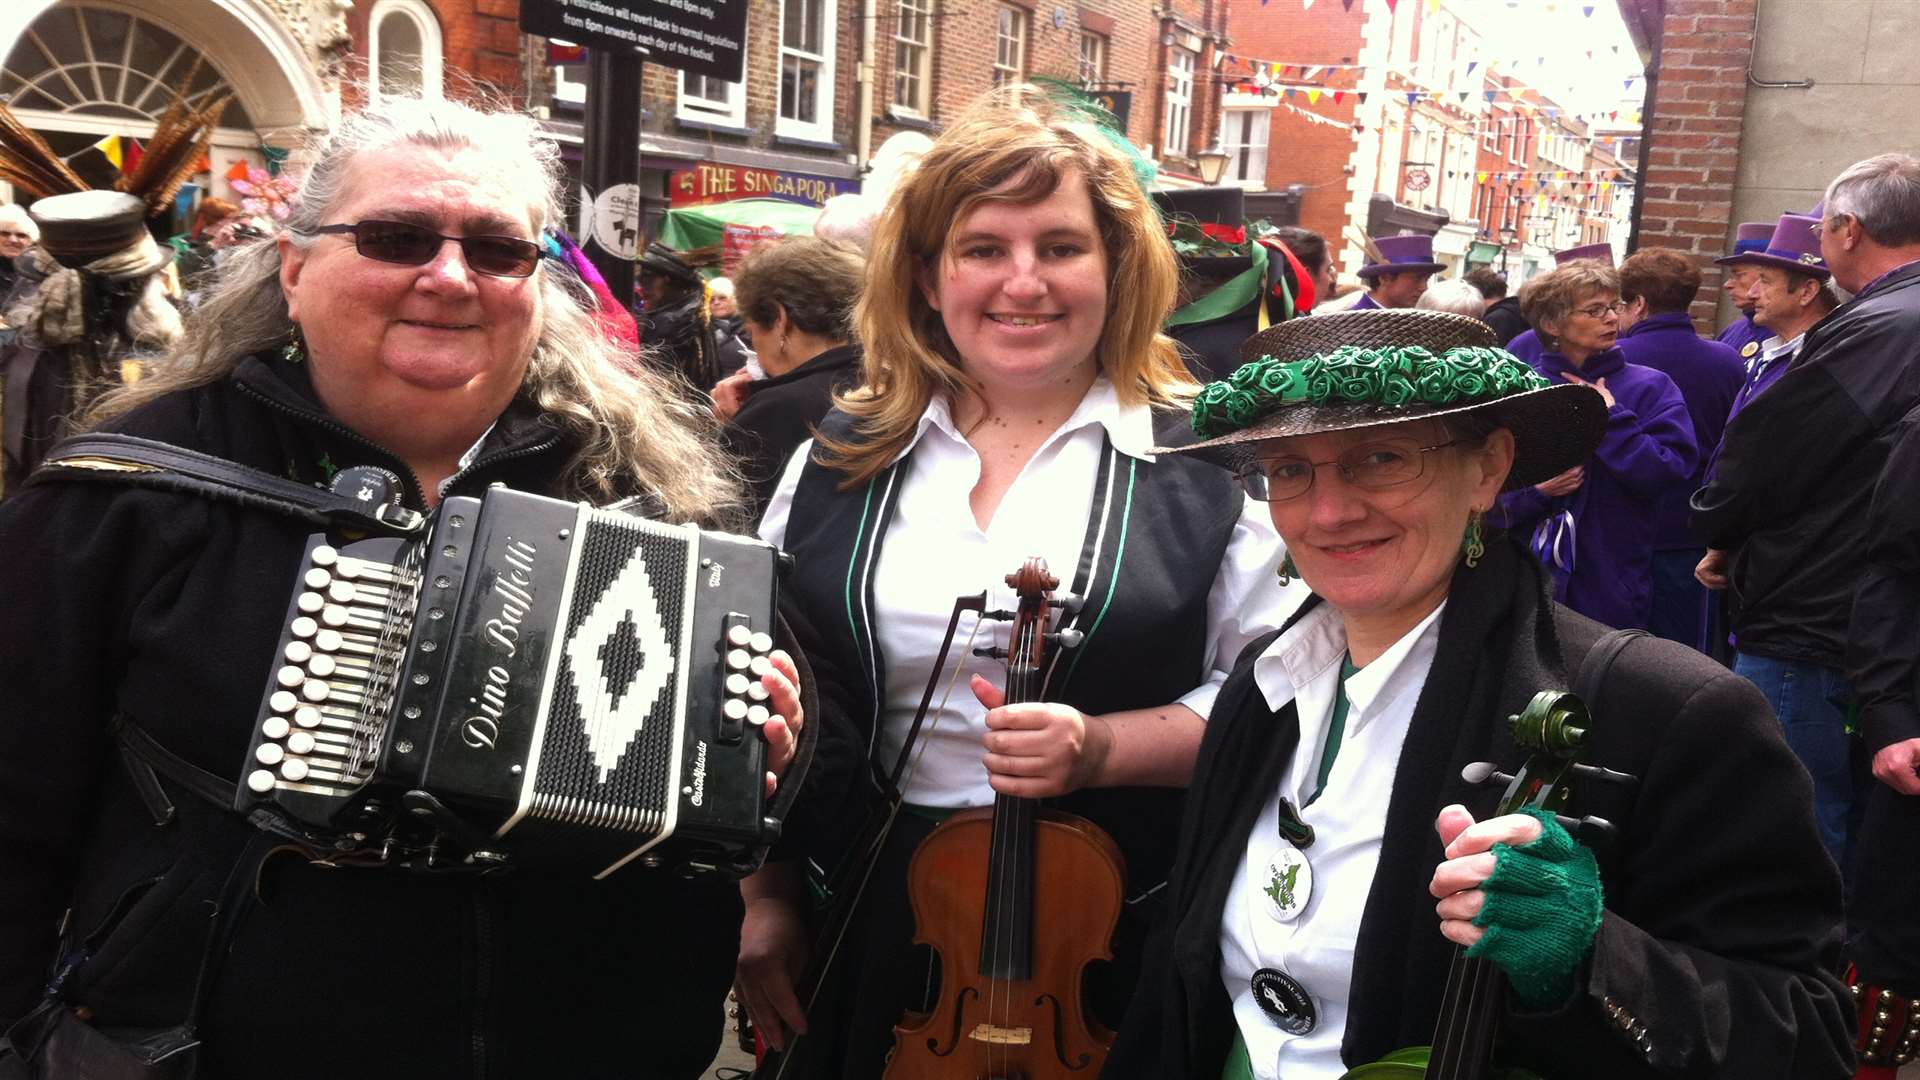 Sue White, Penny Roberts and Heather Nunn at the Sweeps Festival